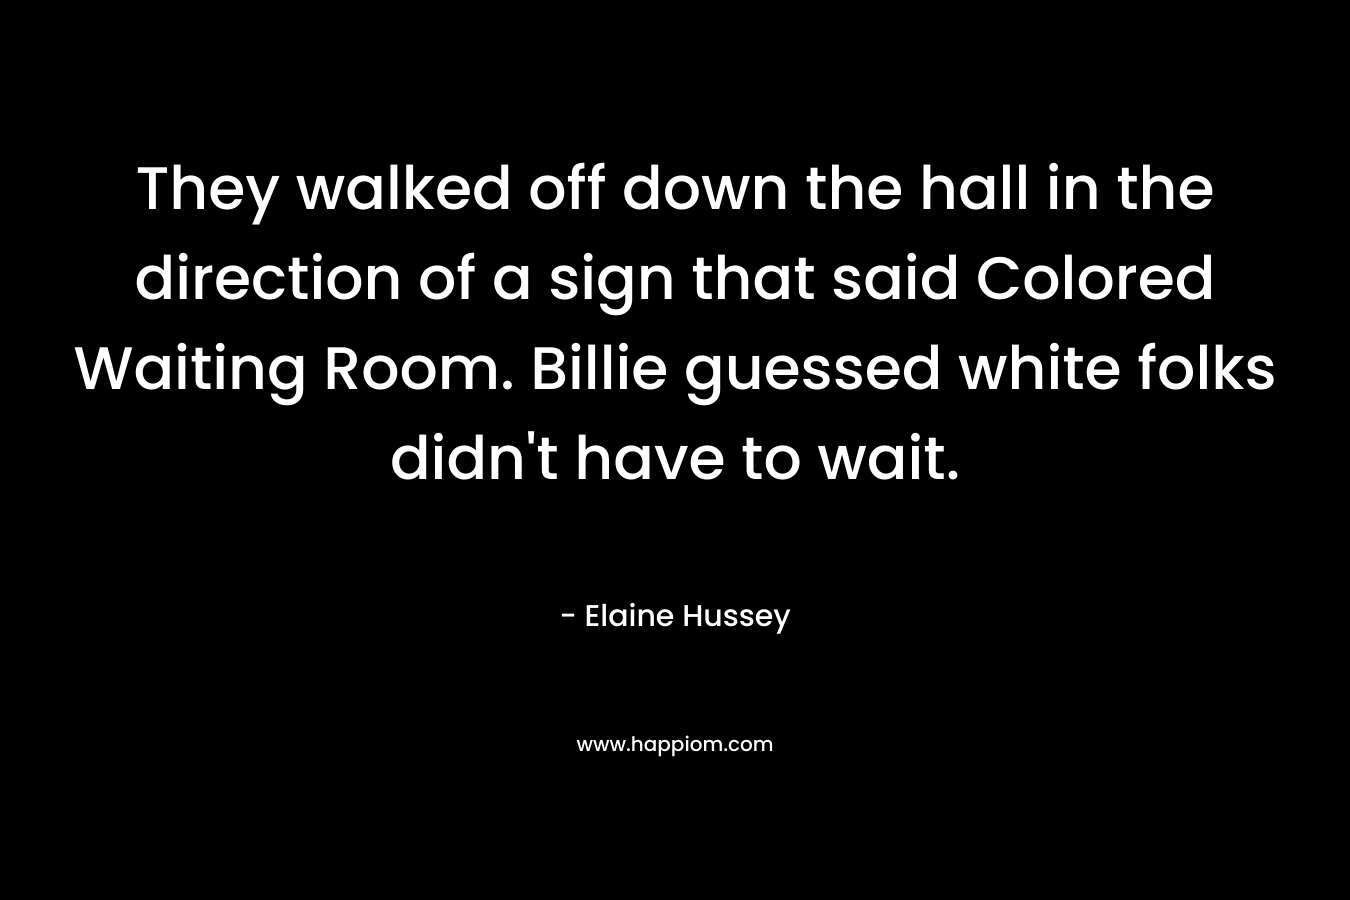 They walked off down the hall in the direction of a sign that said Colored Waiting Room. Billie guessed white folks didn’t have to wait. – Elaine Hussey